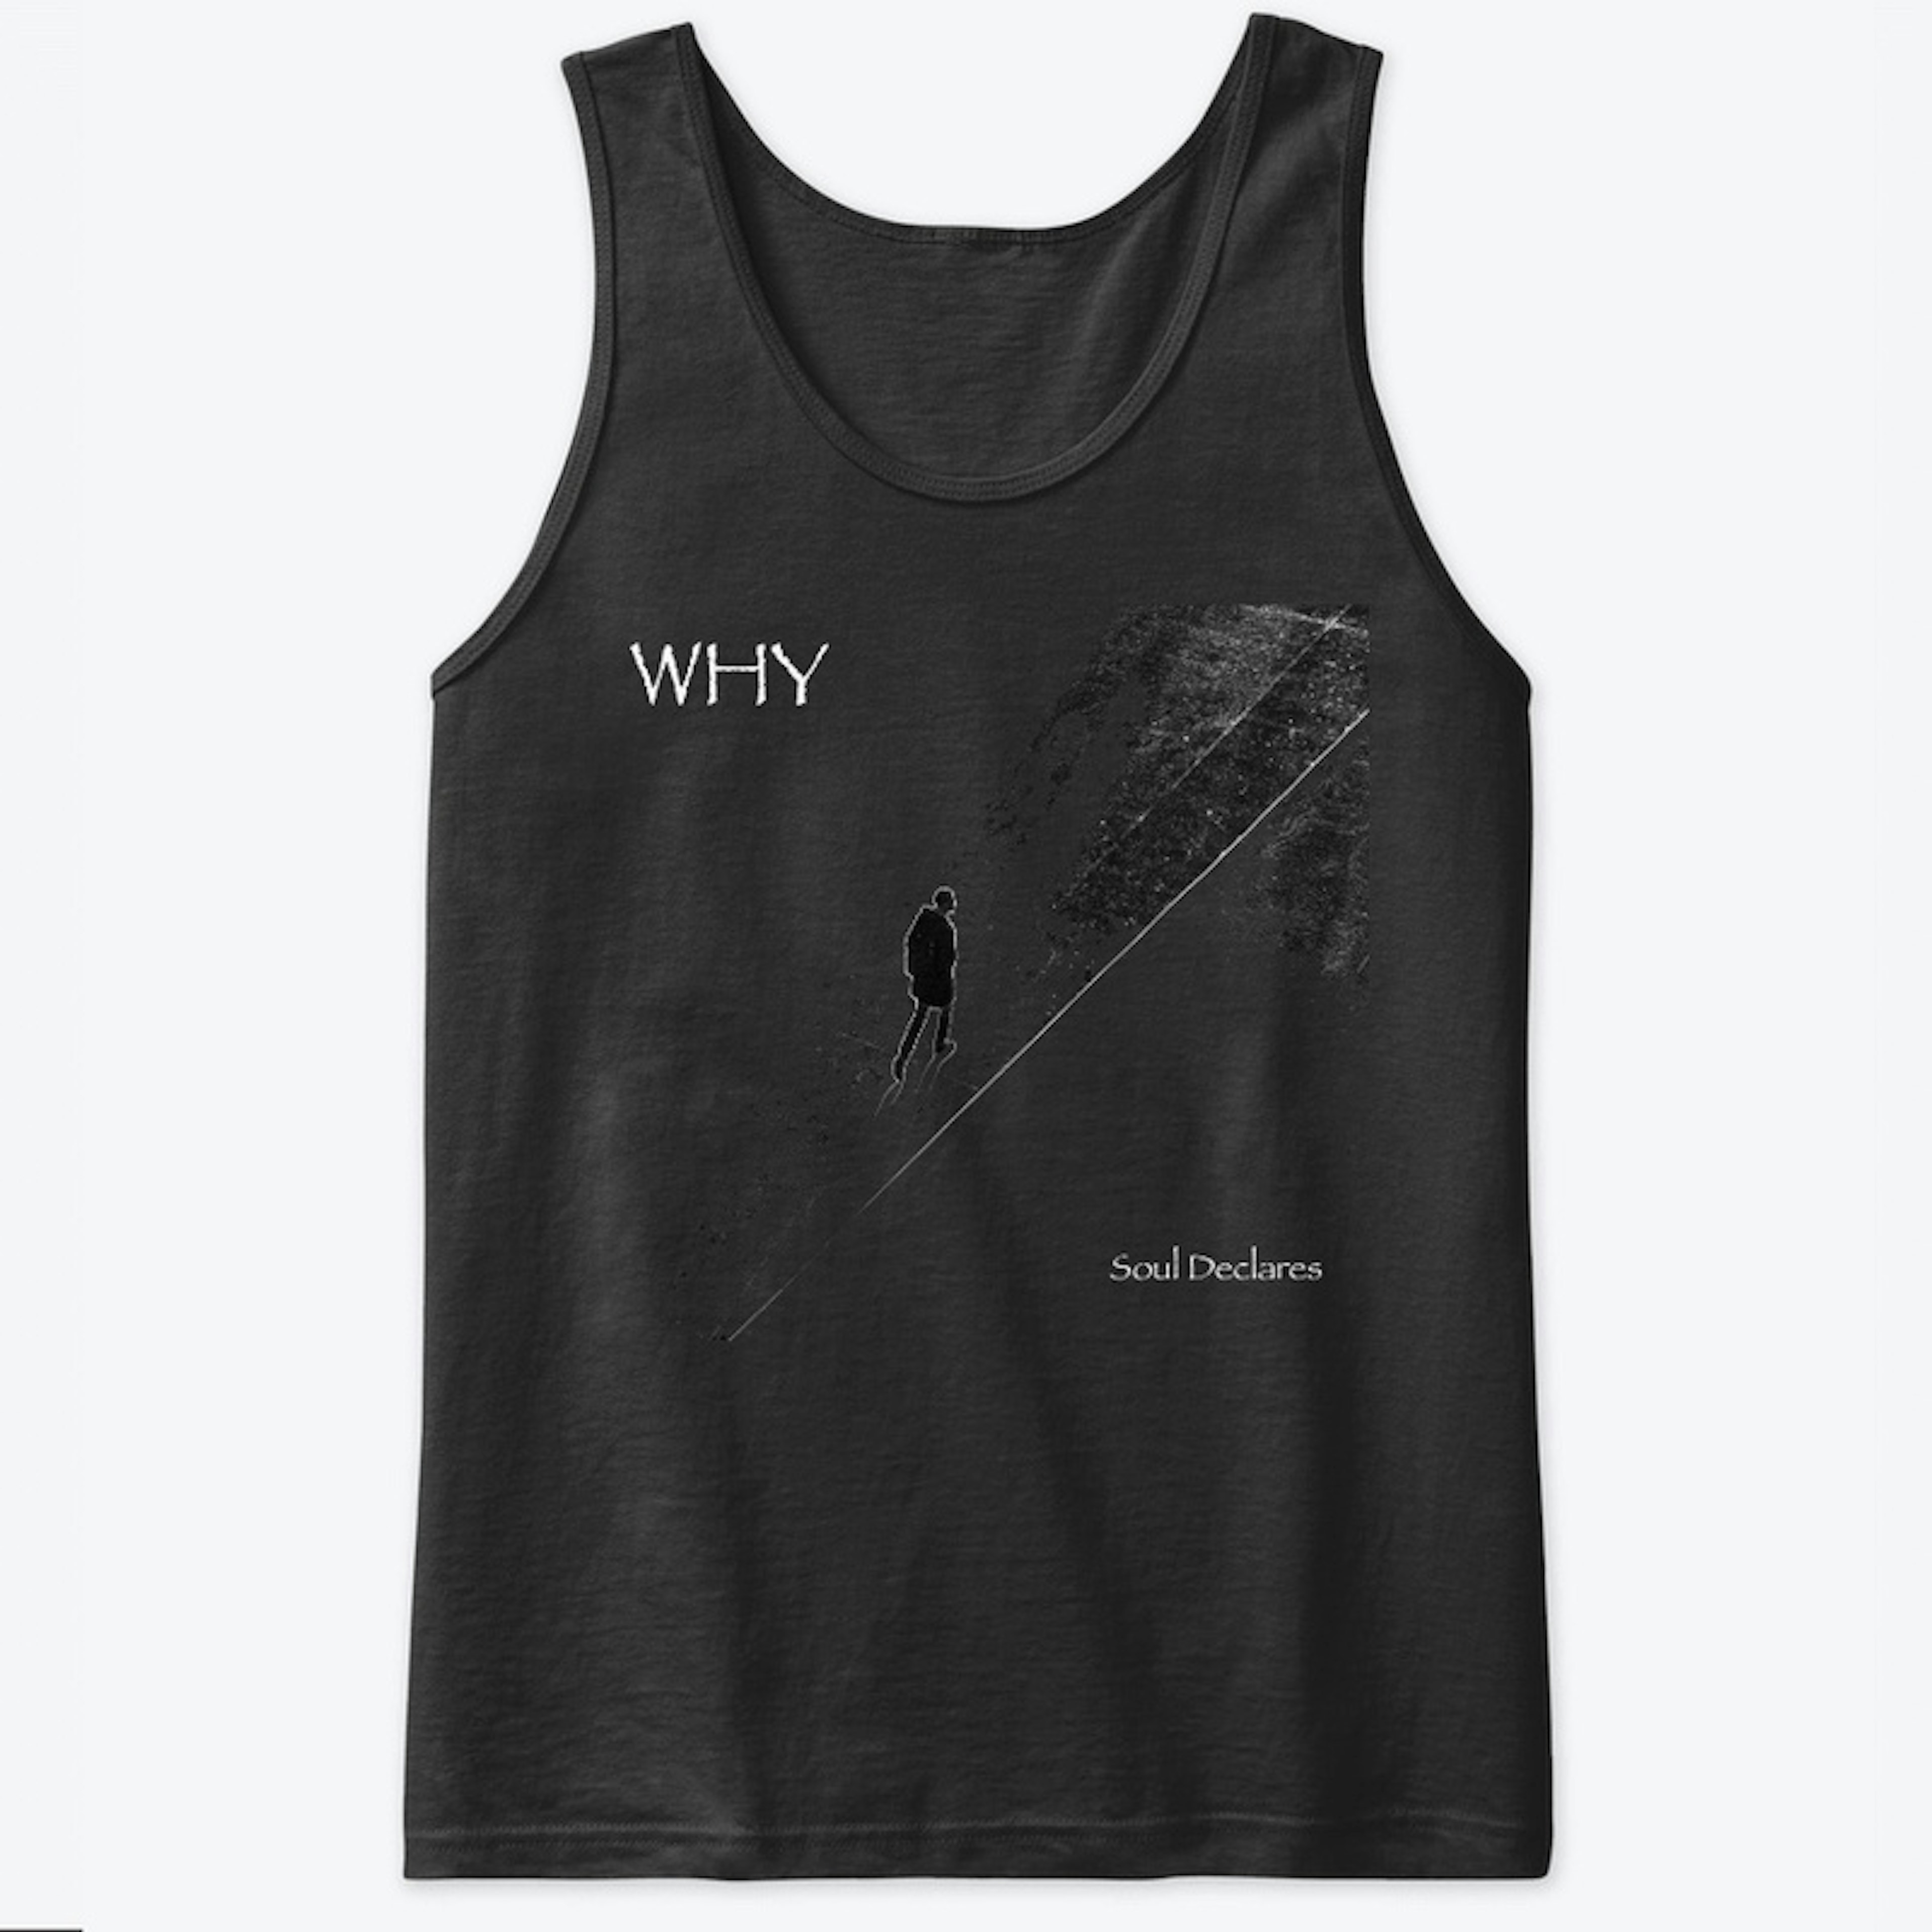 WHY - Soul Declares (Tank Top)